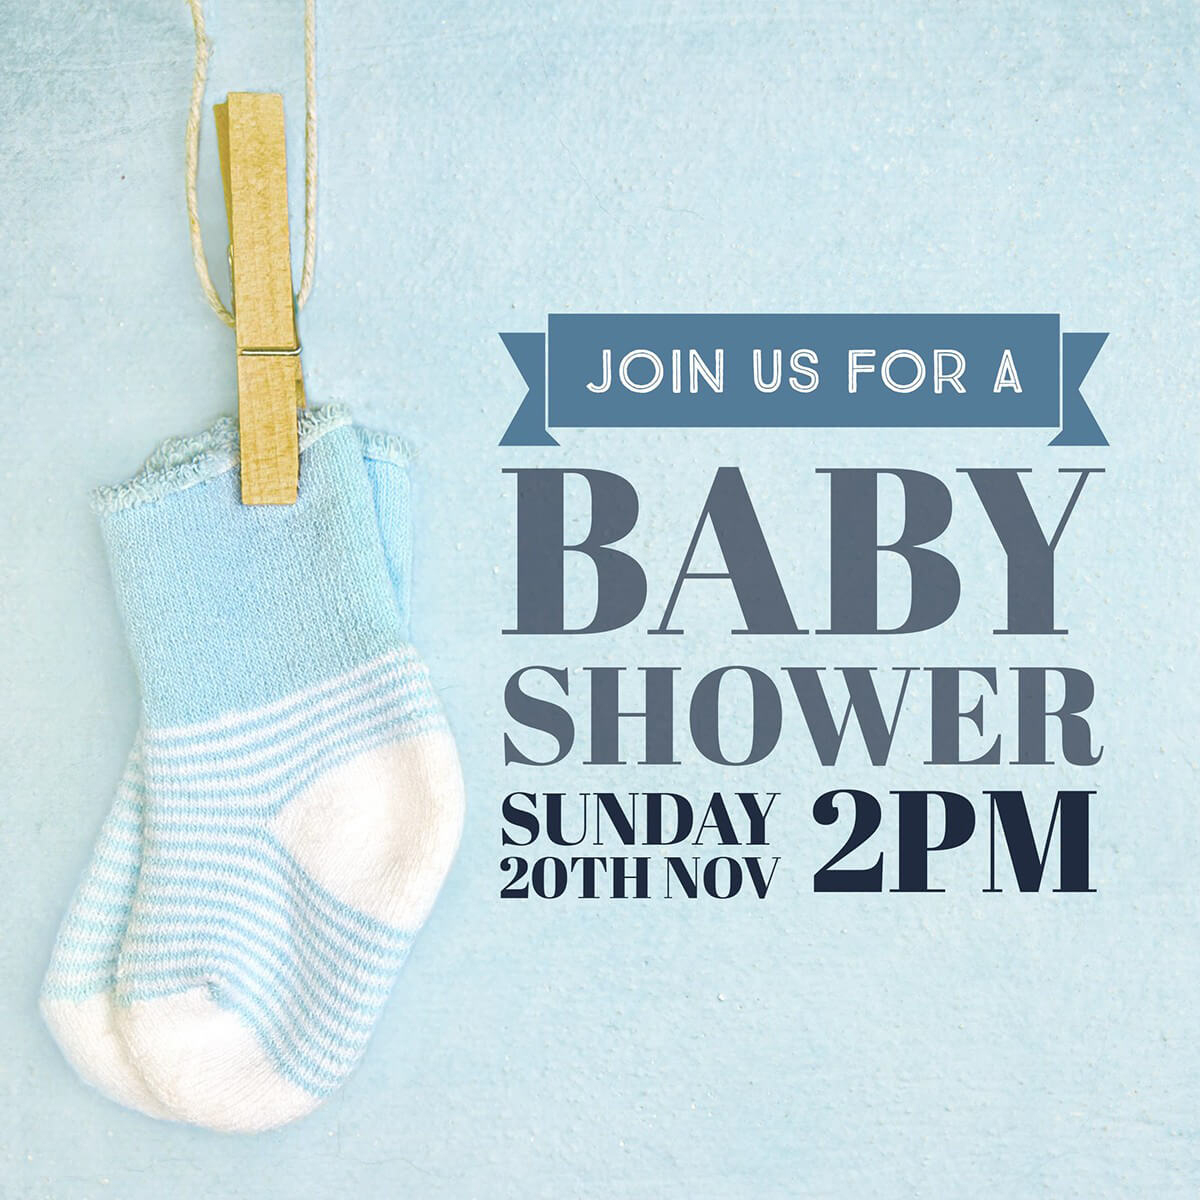 Make Your Own Baby Shower Invitations For Free | Adobe Spark - Create Your Own Baby Shower Invitations Free Printable